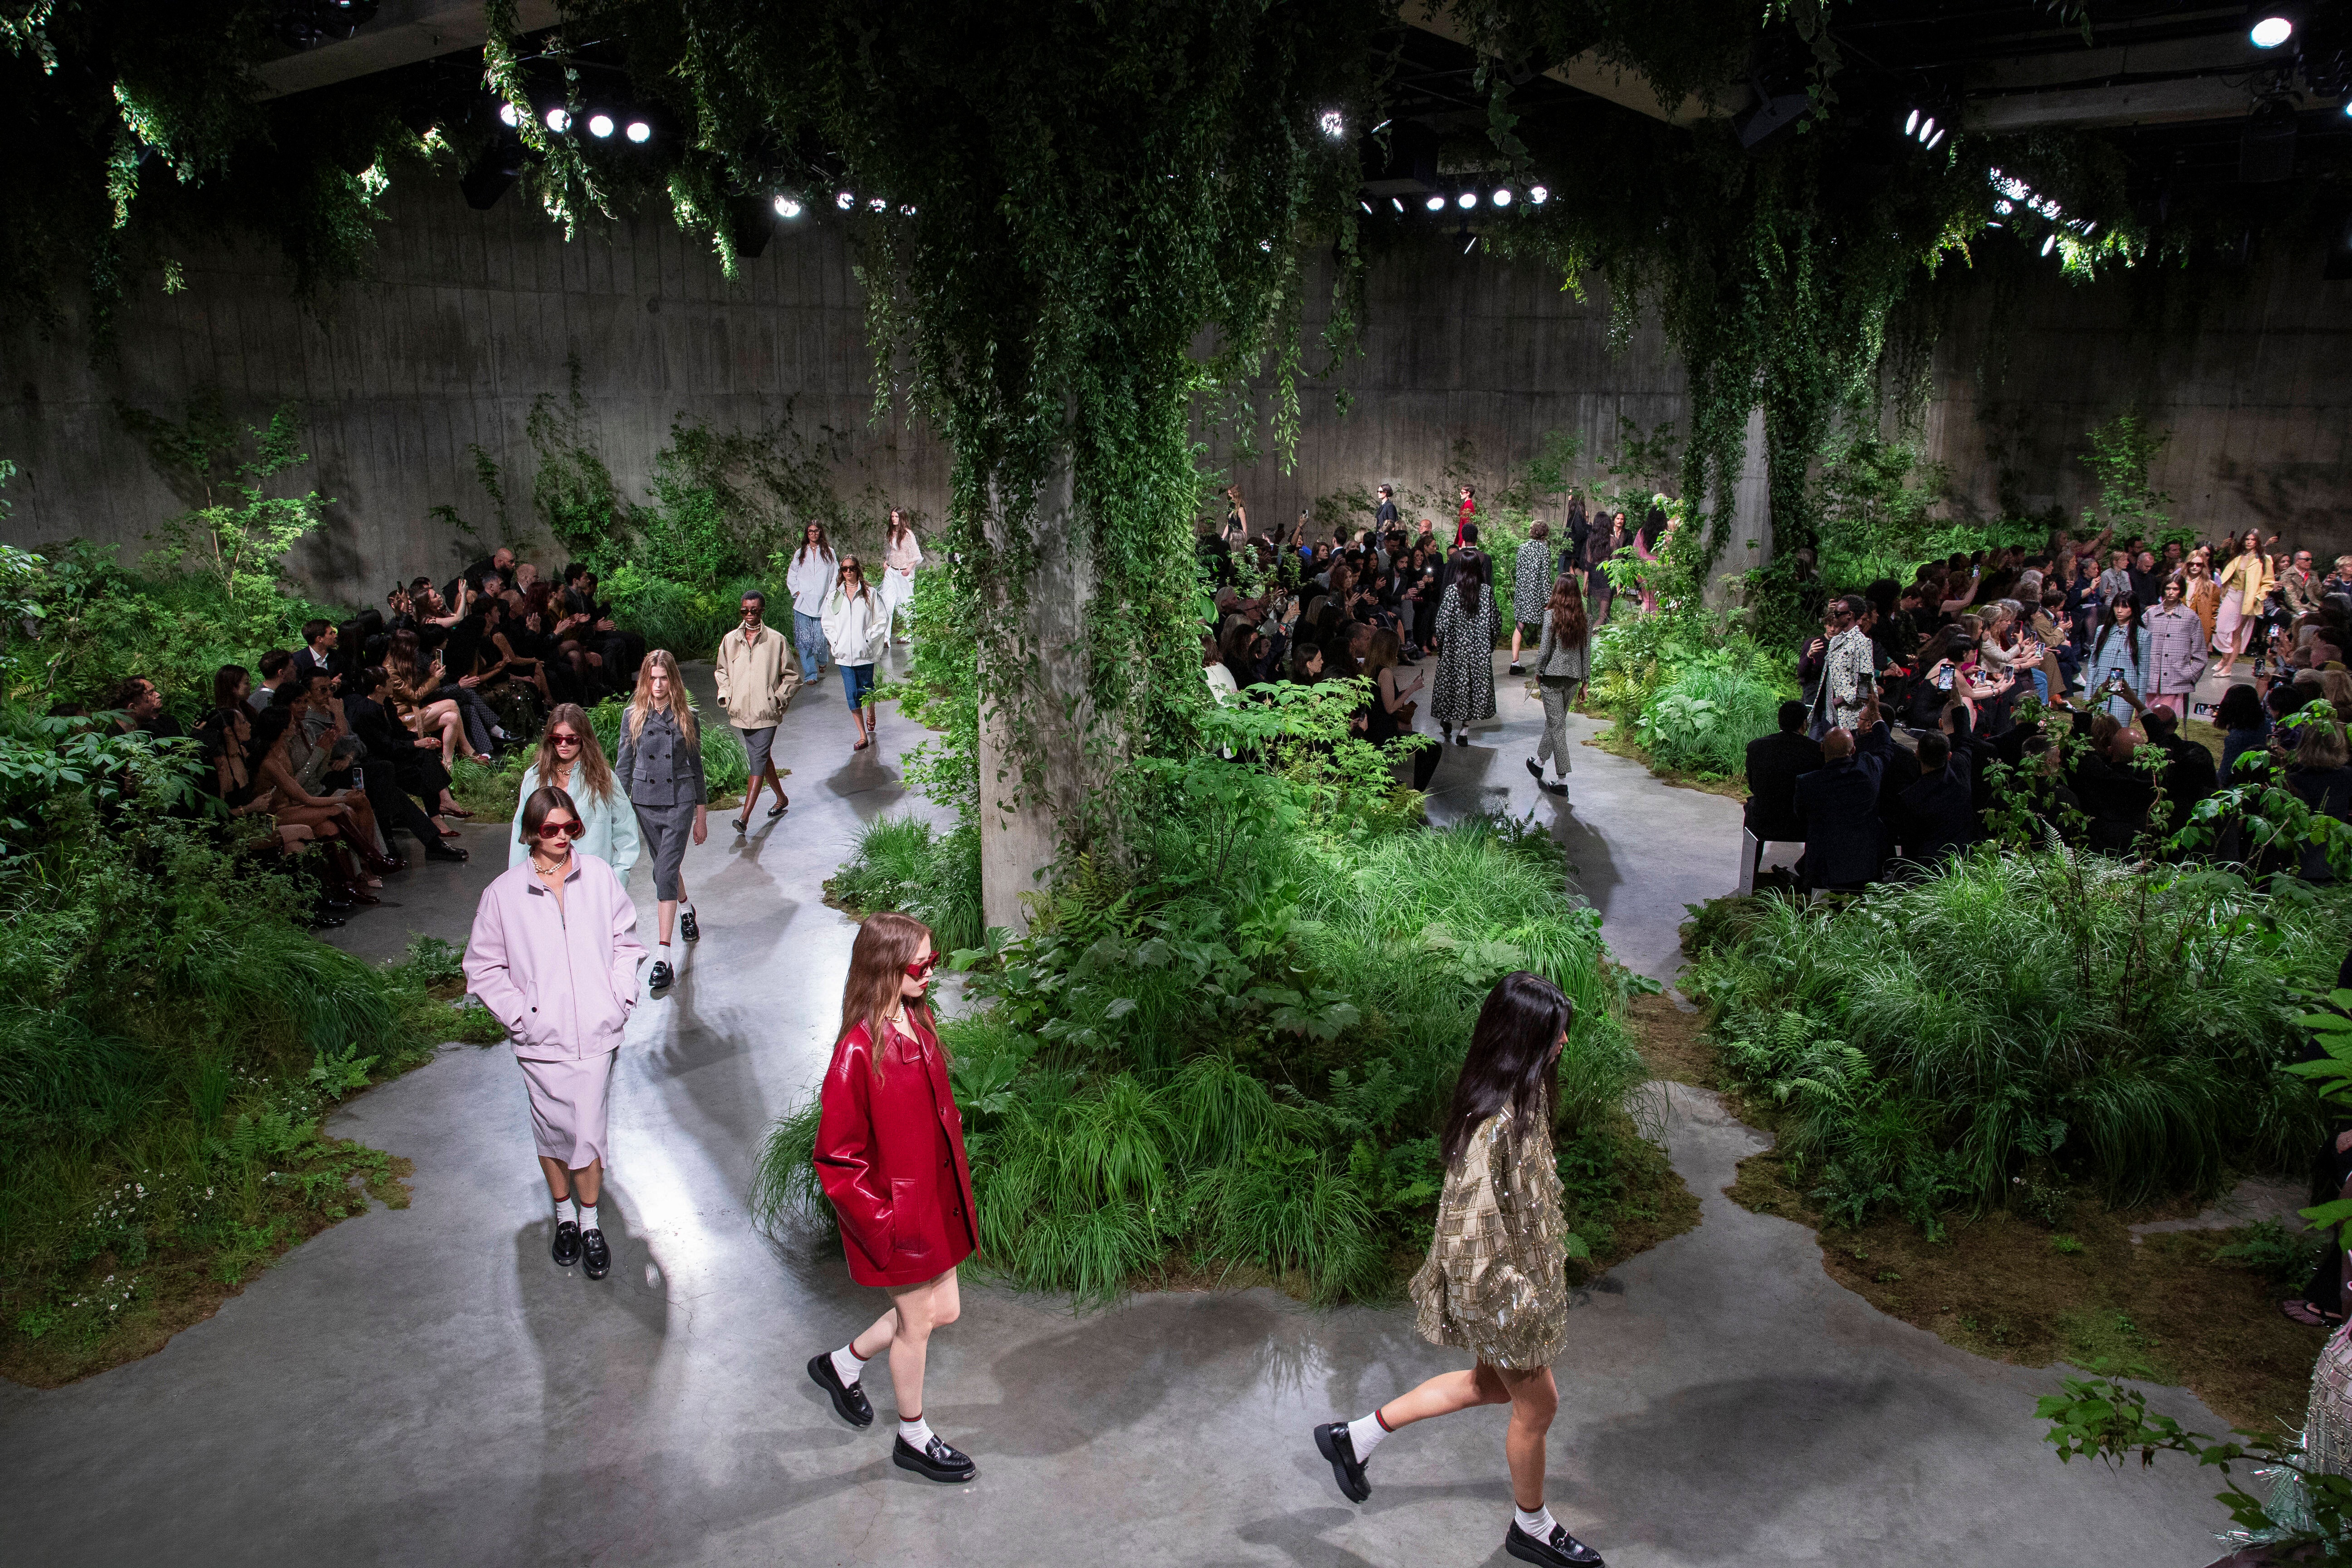 The Gucci Cruise 2025 finale in the Tate Modern, London. Image: Gucci